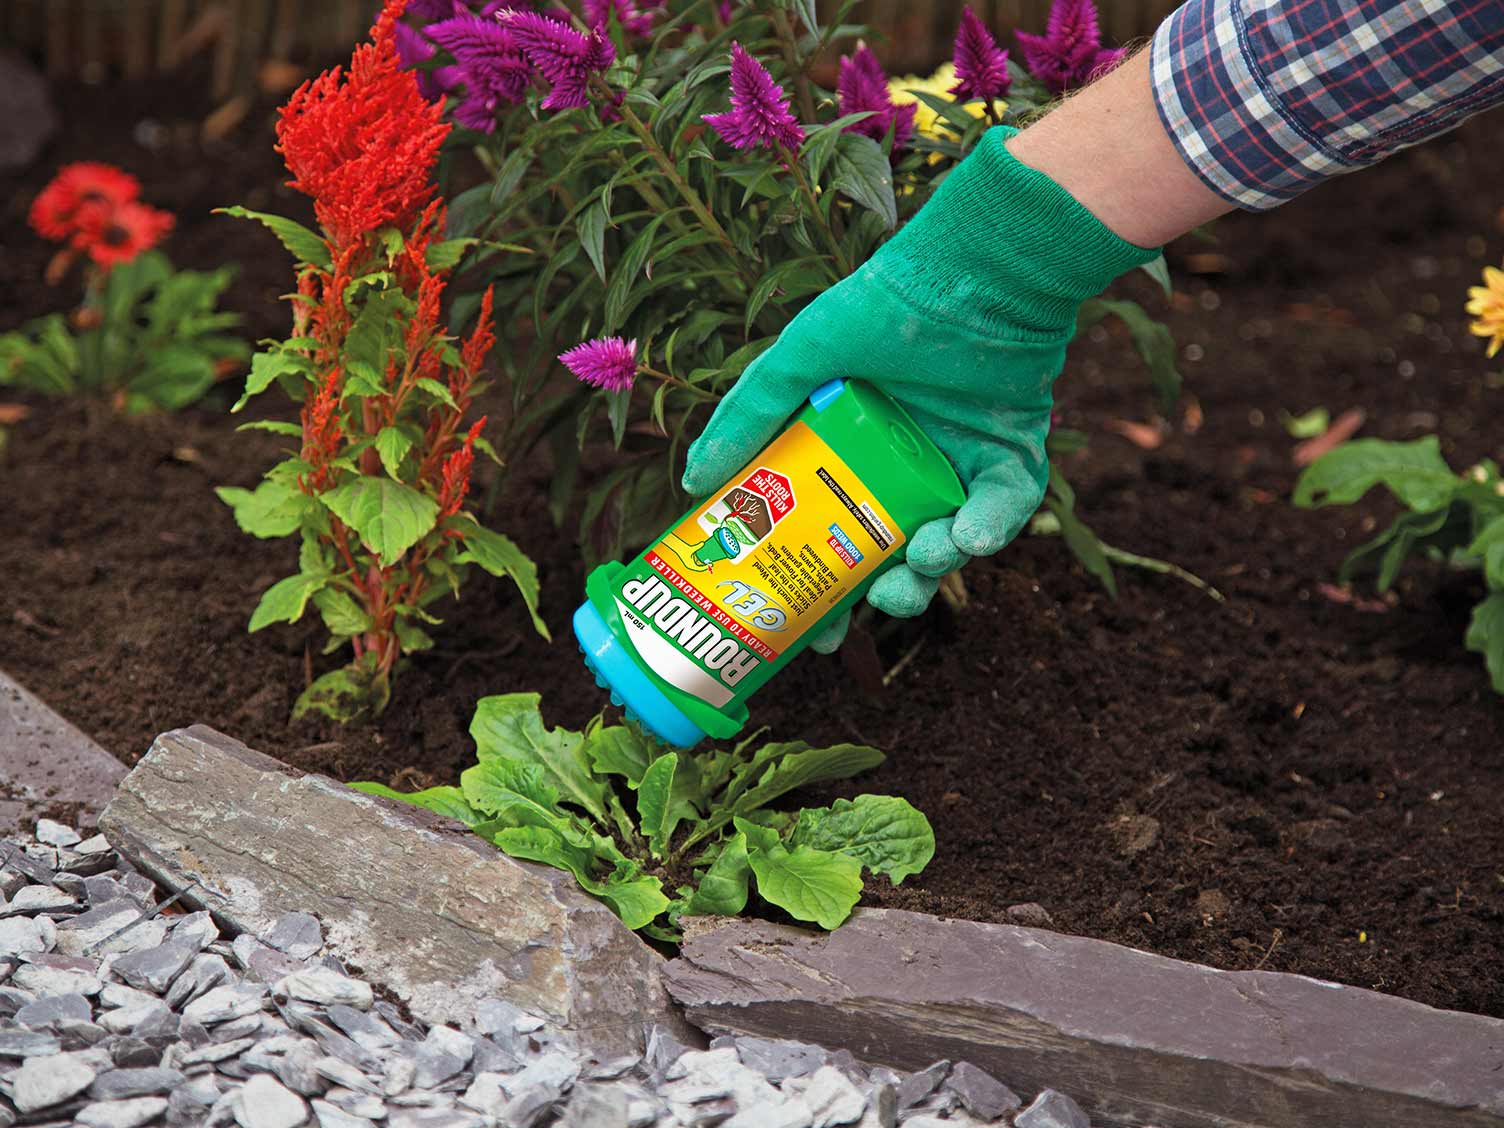 Stop weeds from growing in flower beds